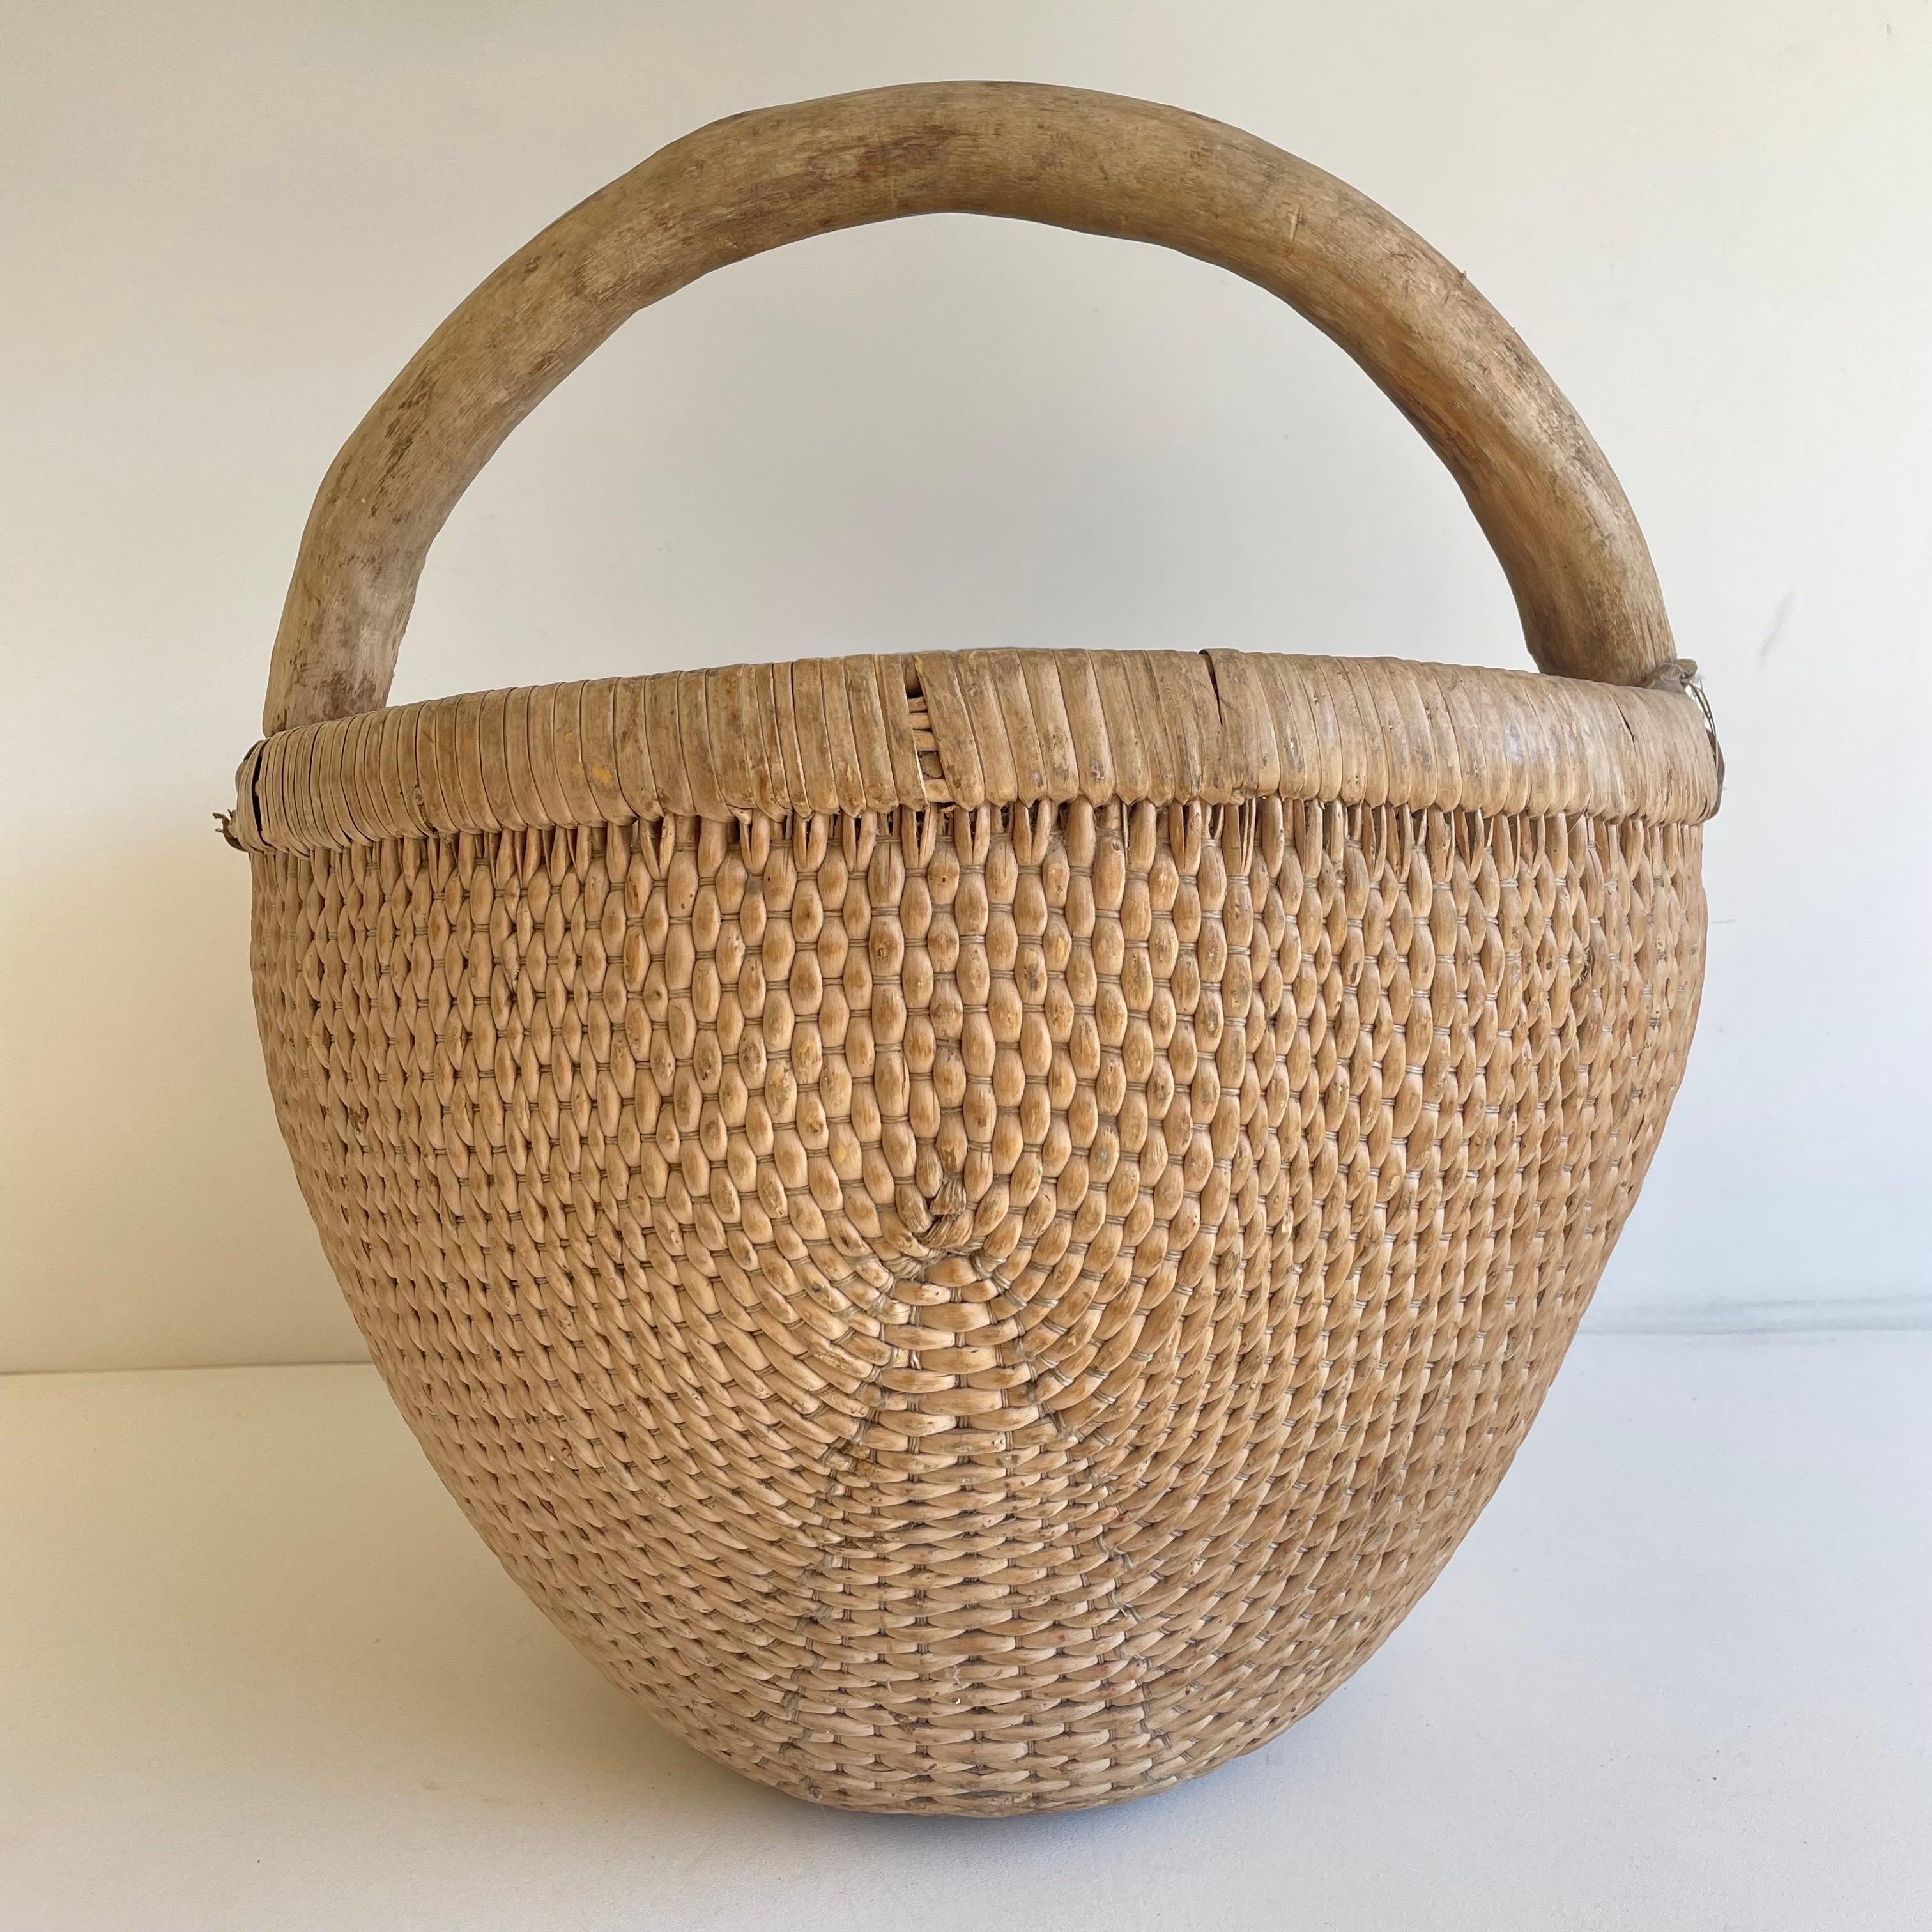 Vintage Woven Wicker Basket with Handle. 
Size: 18”W x 17” x 18 1/2”H 